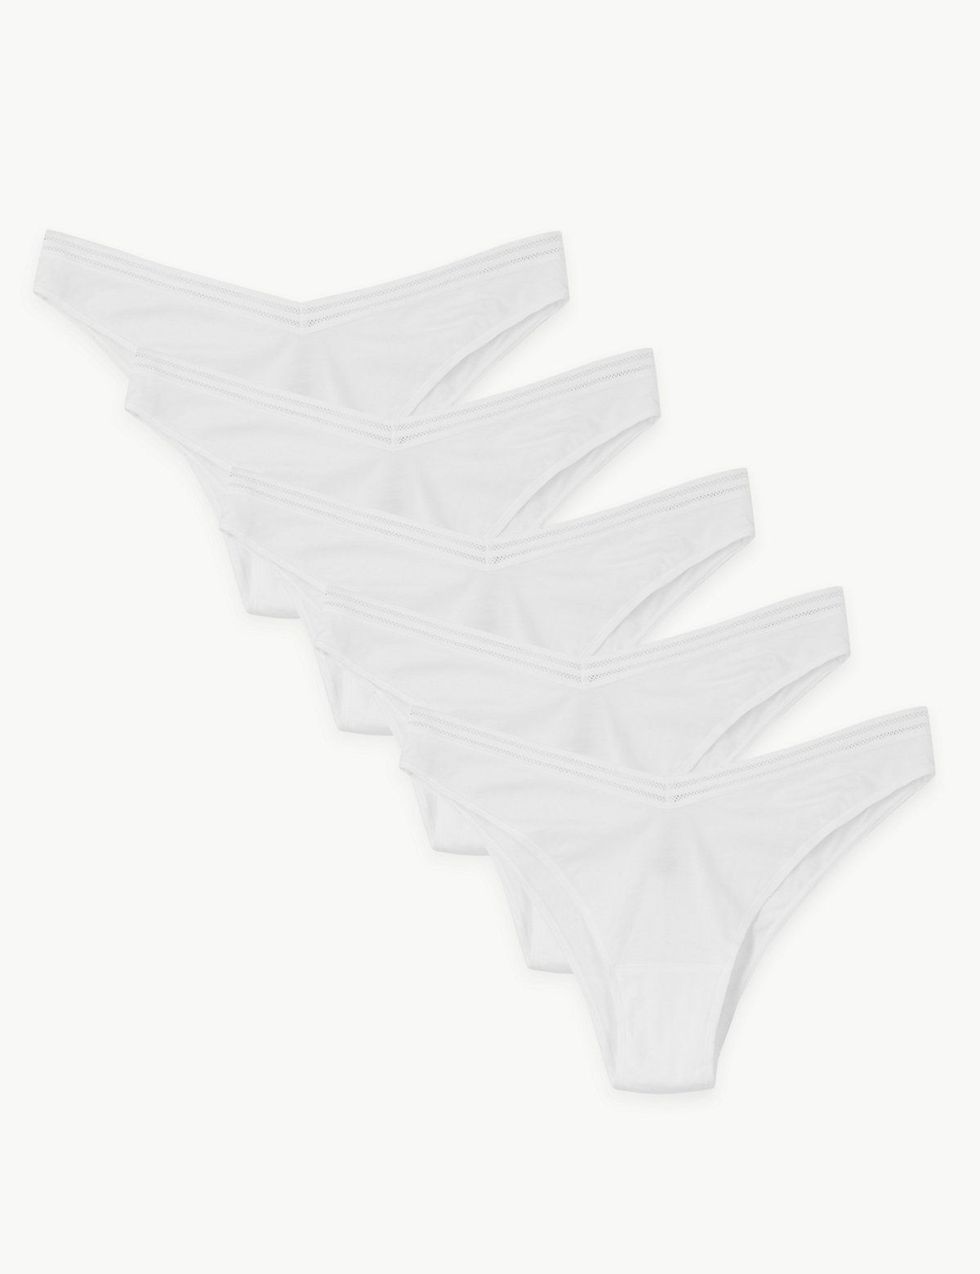 MARKS & SPENCER M&S 5 Pack Cotton Briefs 2024